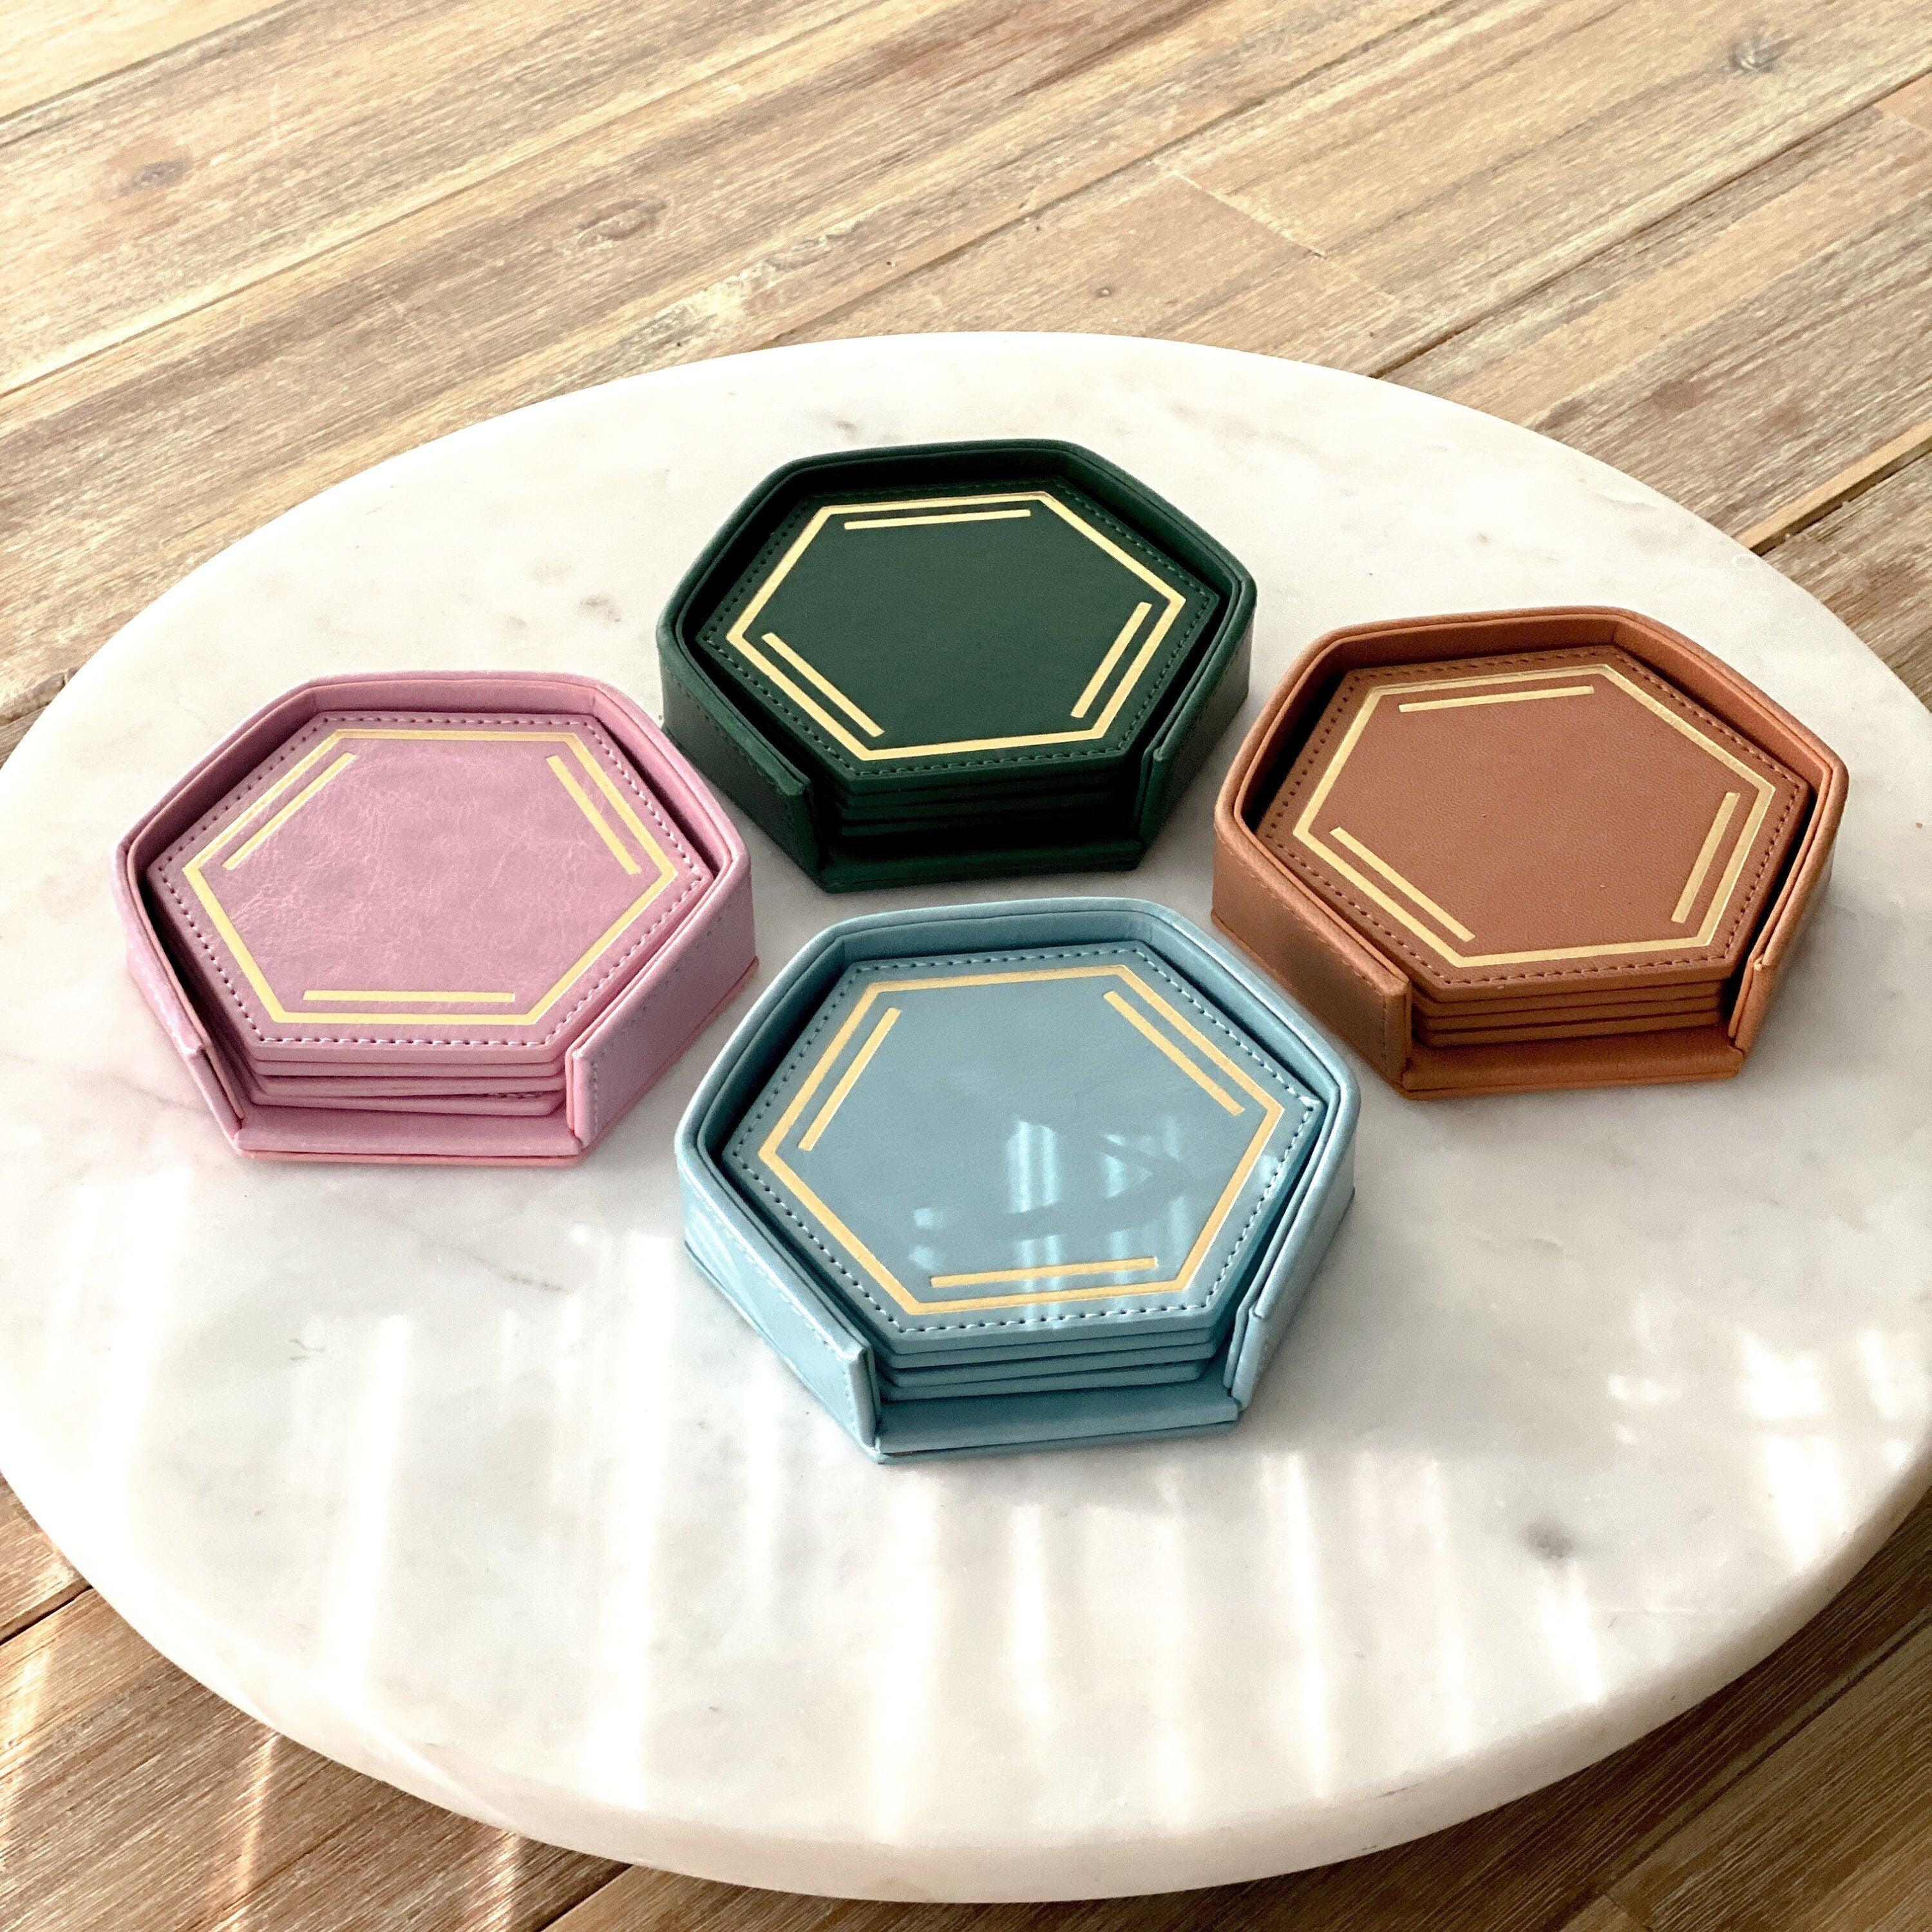 Benzene Science Chemistry Coaster Set made of PU Leather by The Calculated Chemist. Embossed with a gold foil benzene chemistry molecular structure. Perfect gift for science lovers, scientists, STEM teachers and students